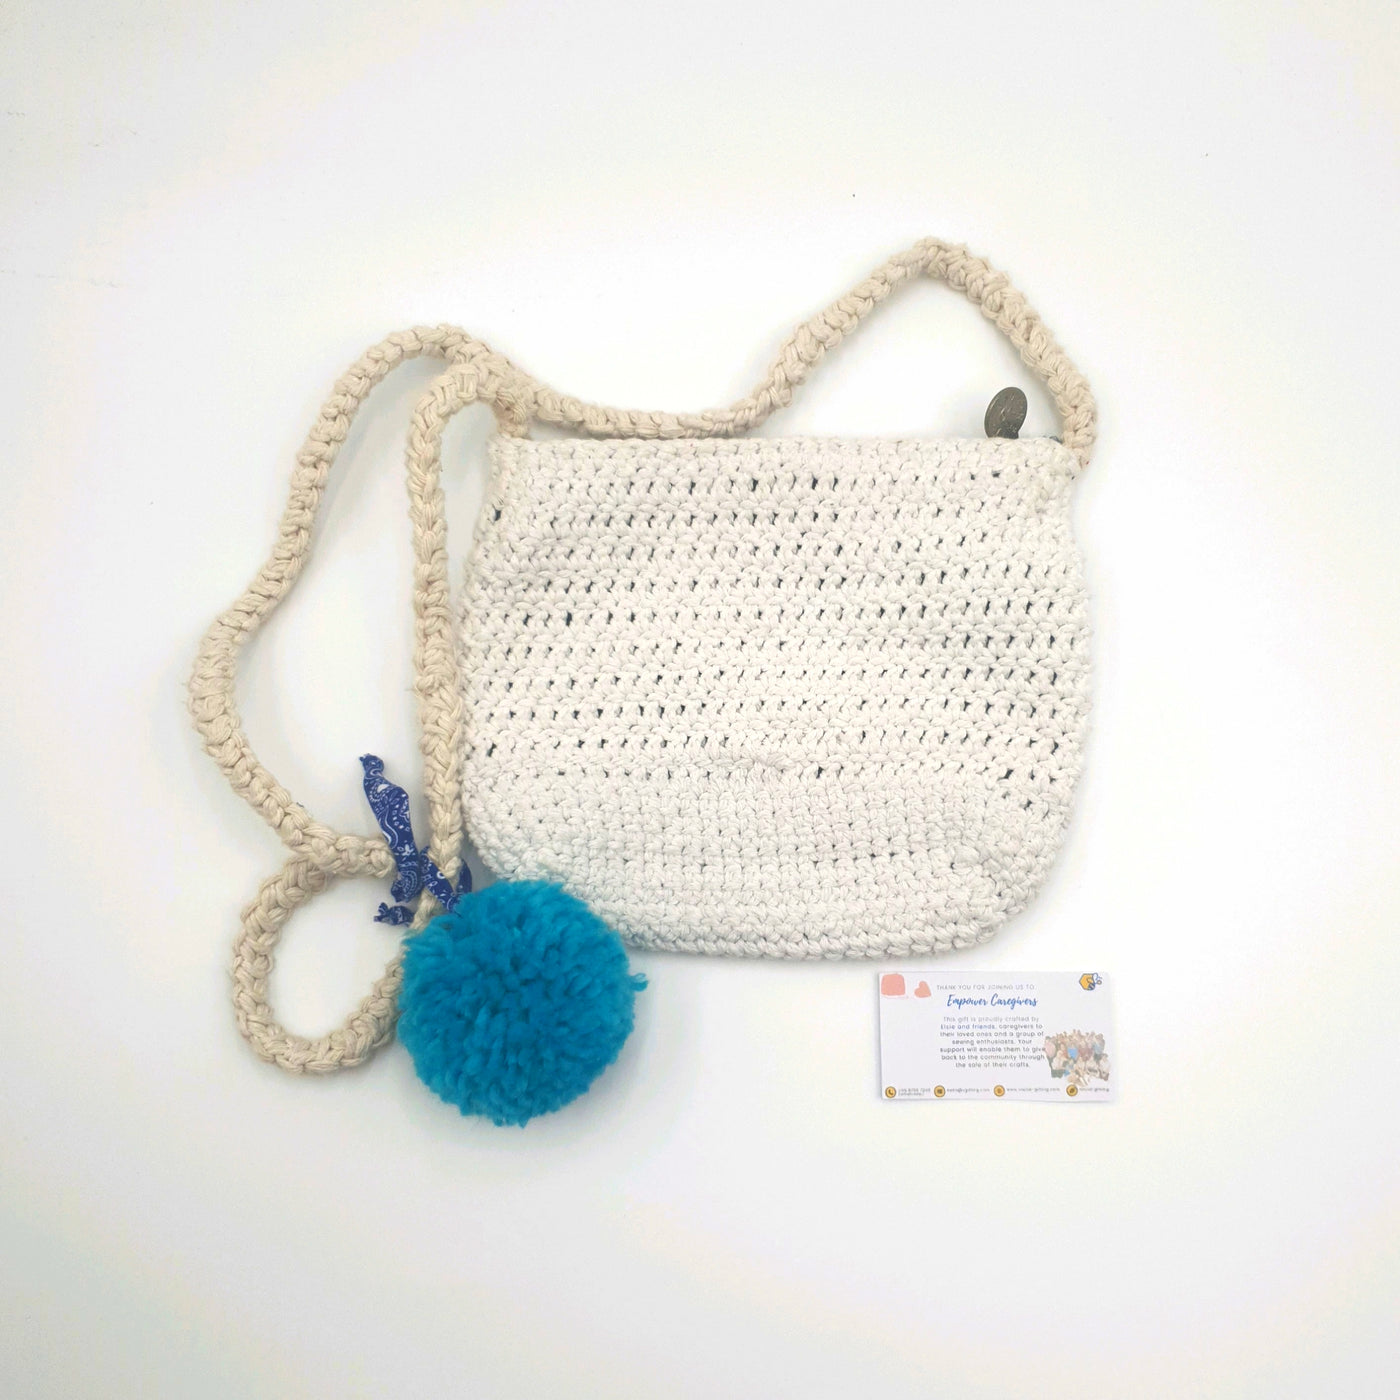 Small Crocheted Sling Bag with Accessories